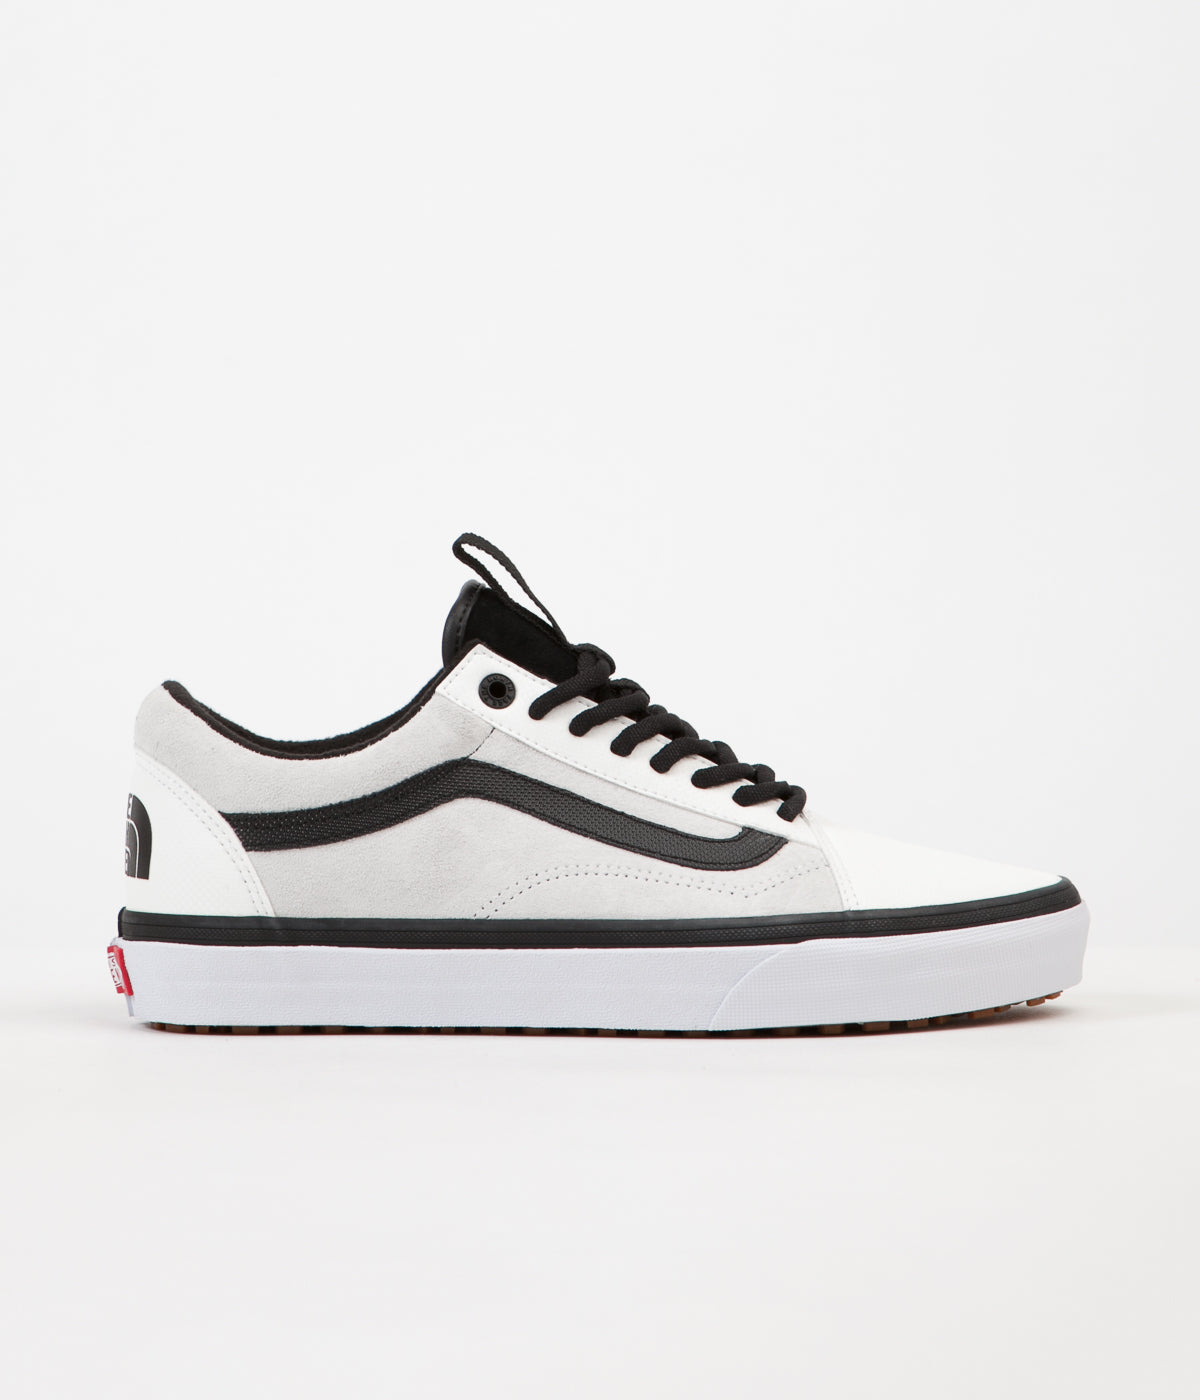 Vans The North Face Old Skool MTE DX - True White / Black | in Colour